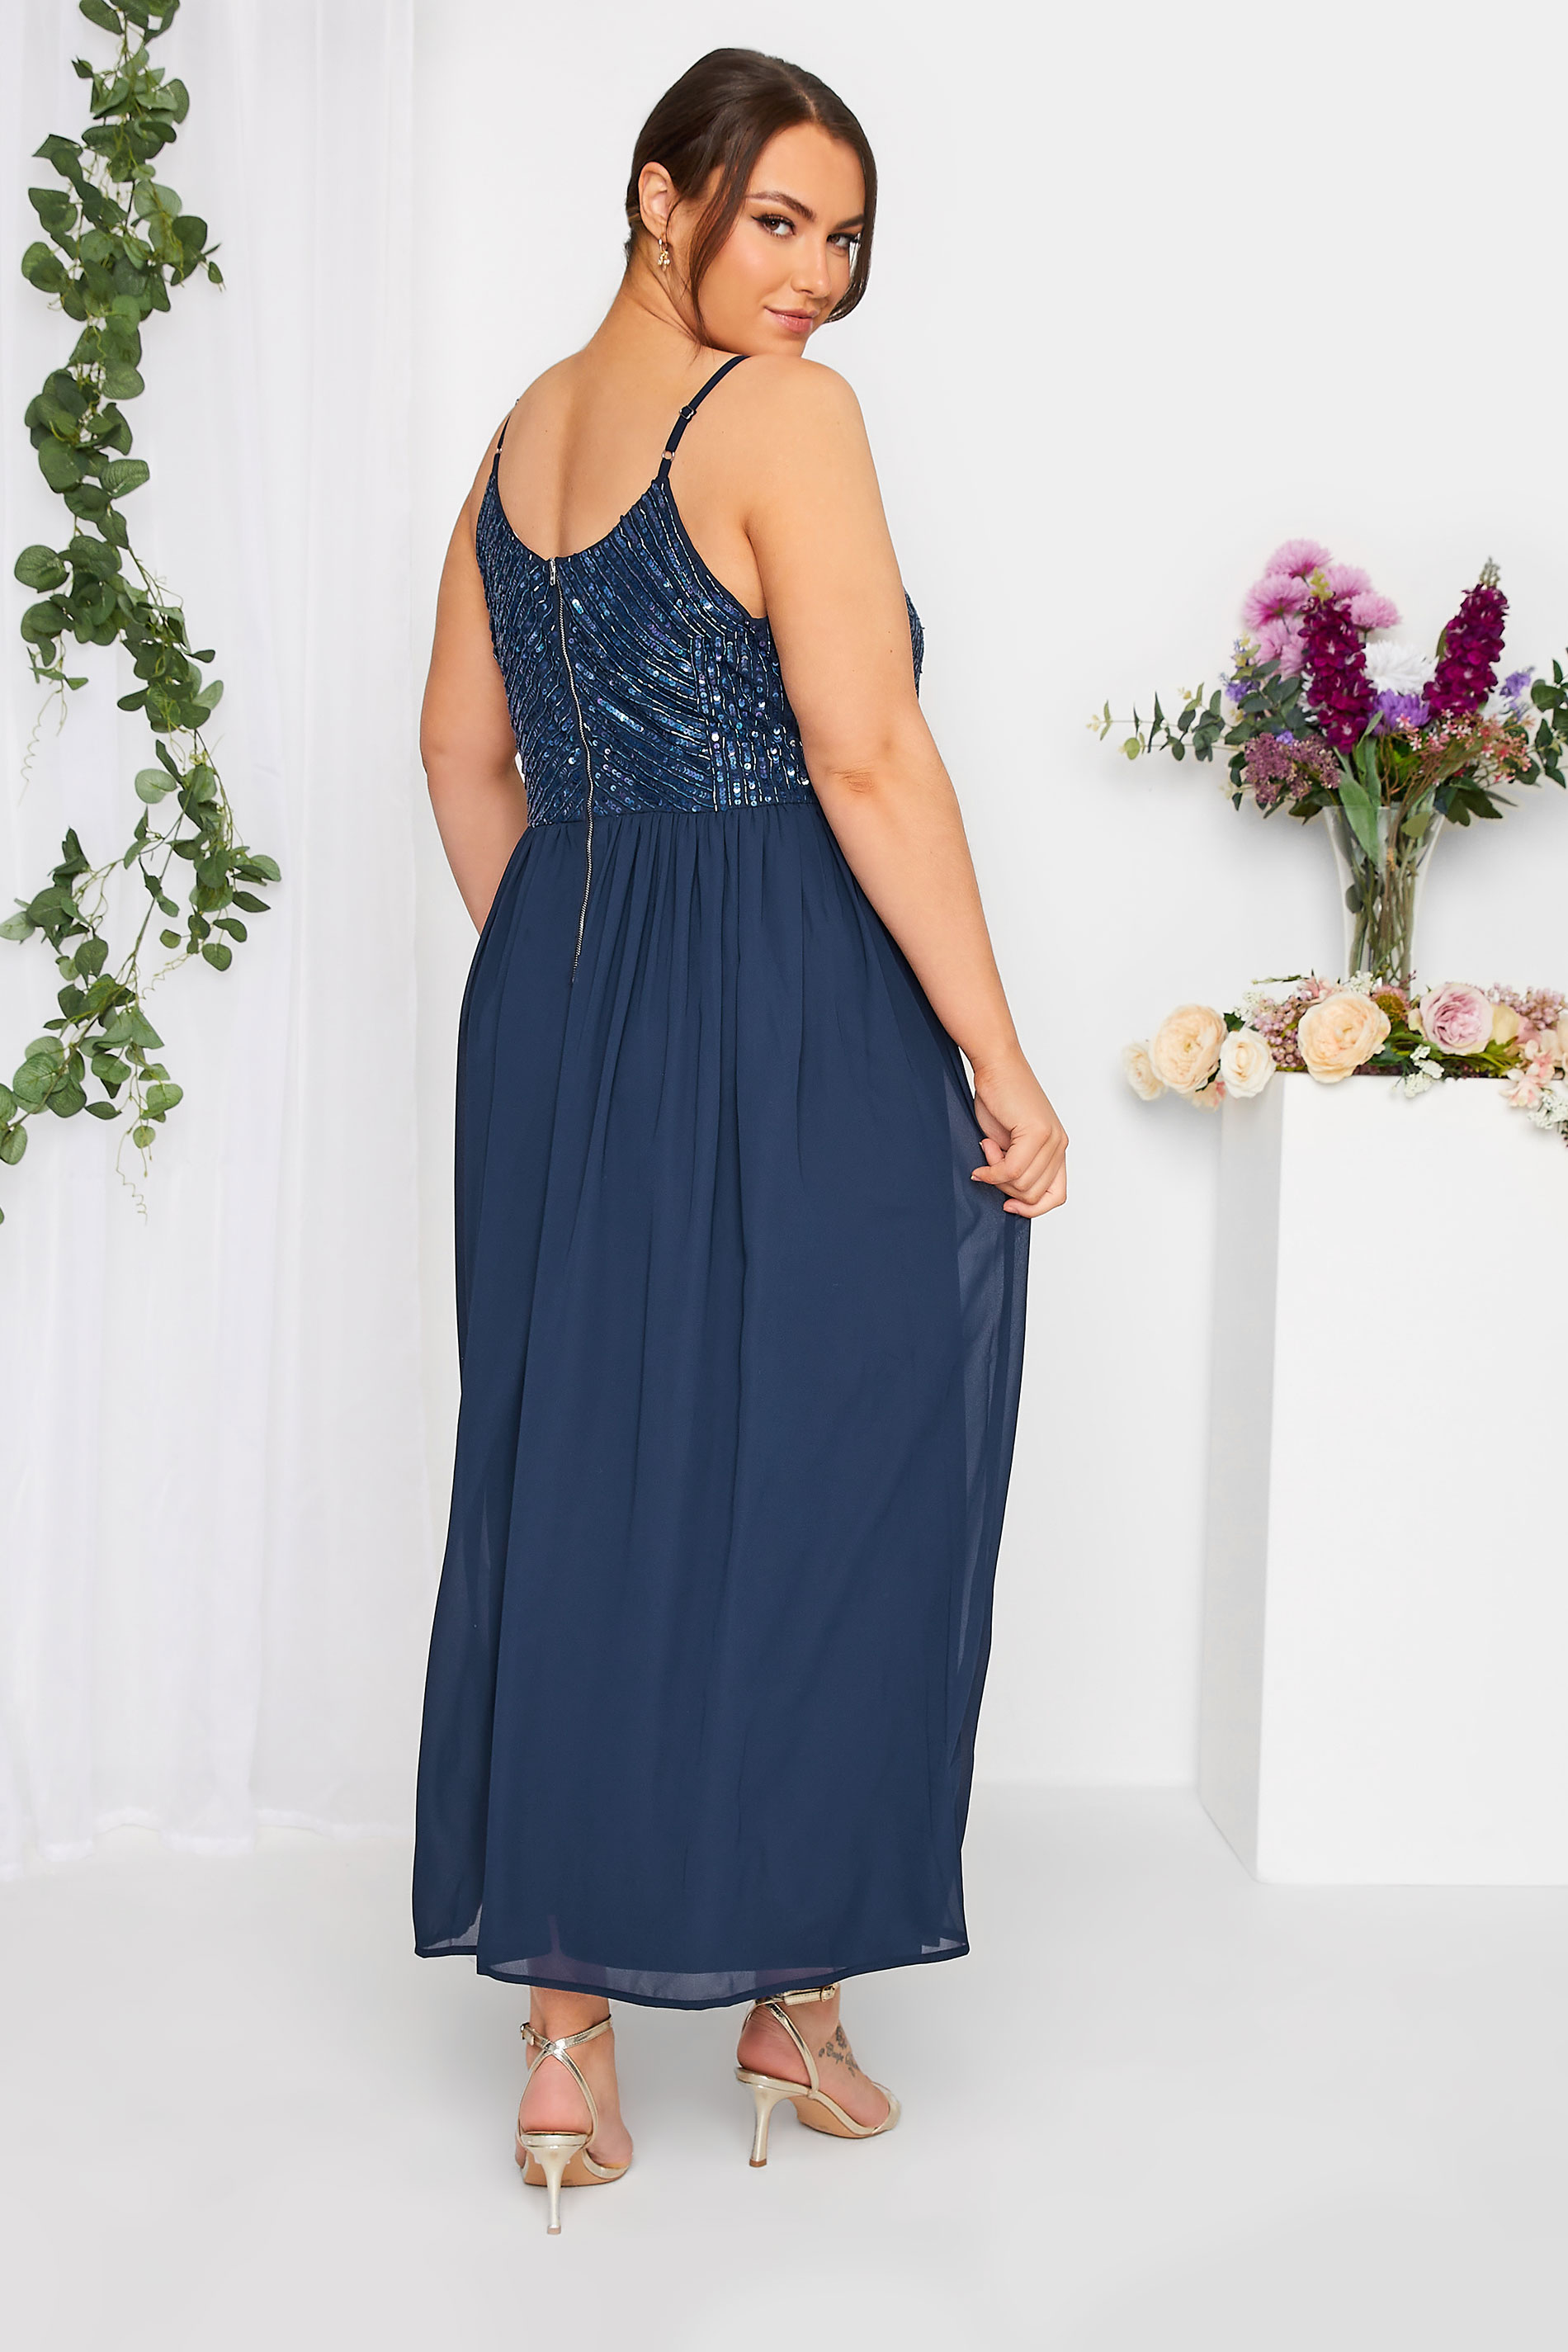 LUXE Plus Size Navy Blue Sequin Embellished Maxi Dress | Yours